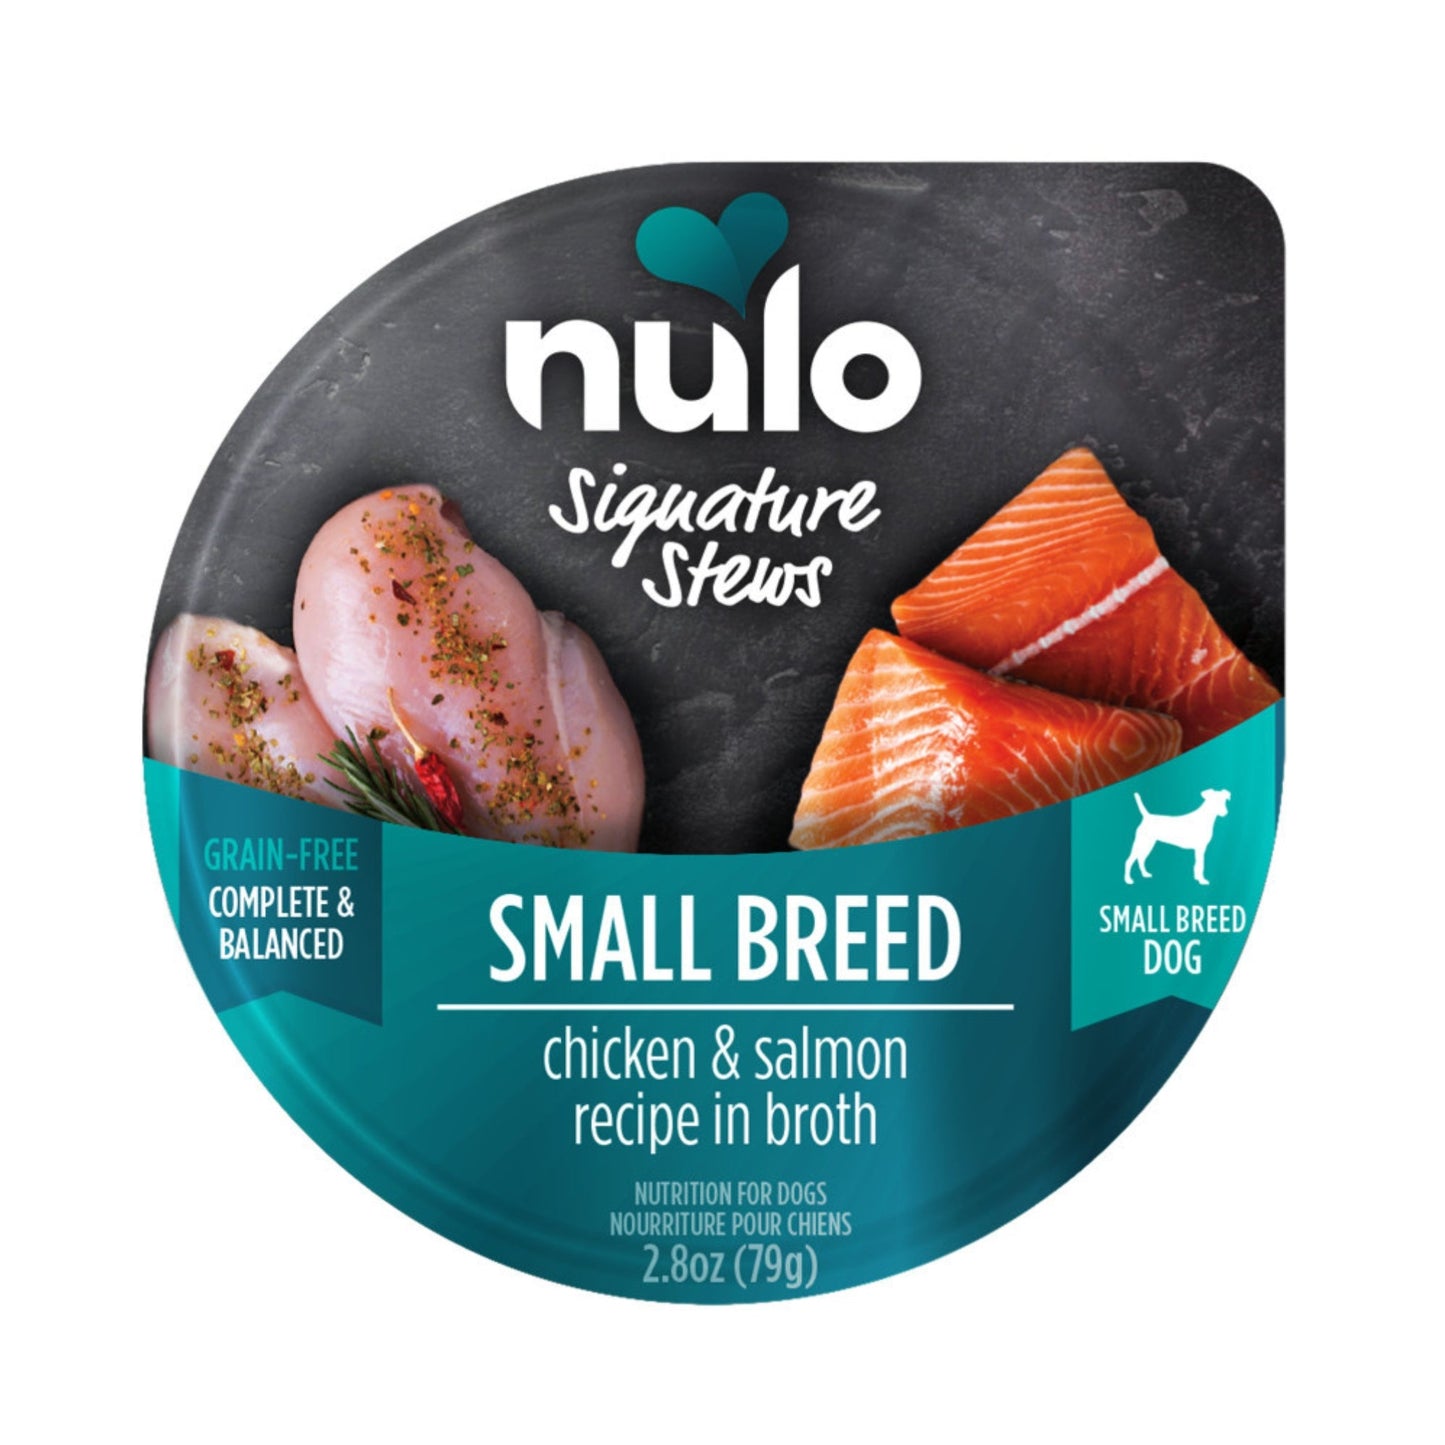 Nulo Signature Stew Small Breed Dog Food Chicken & Salmon 2.8oz. (Case of 24)